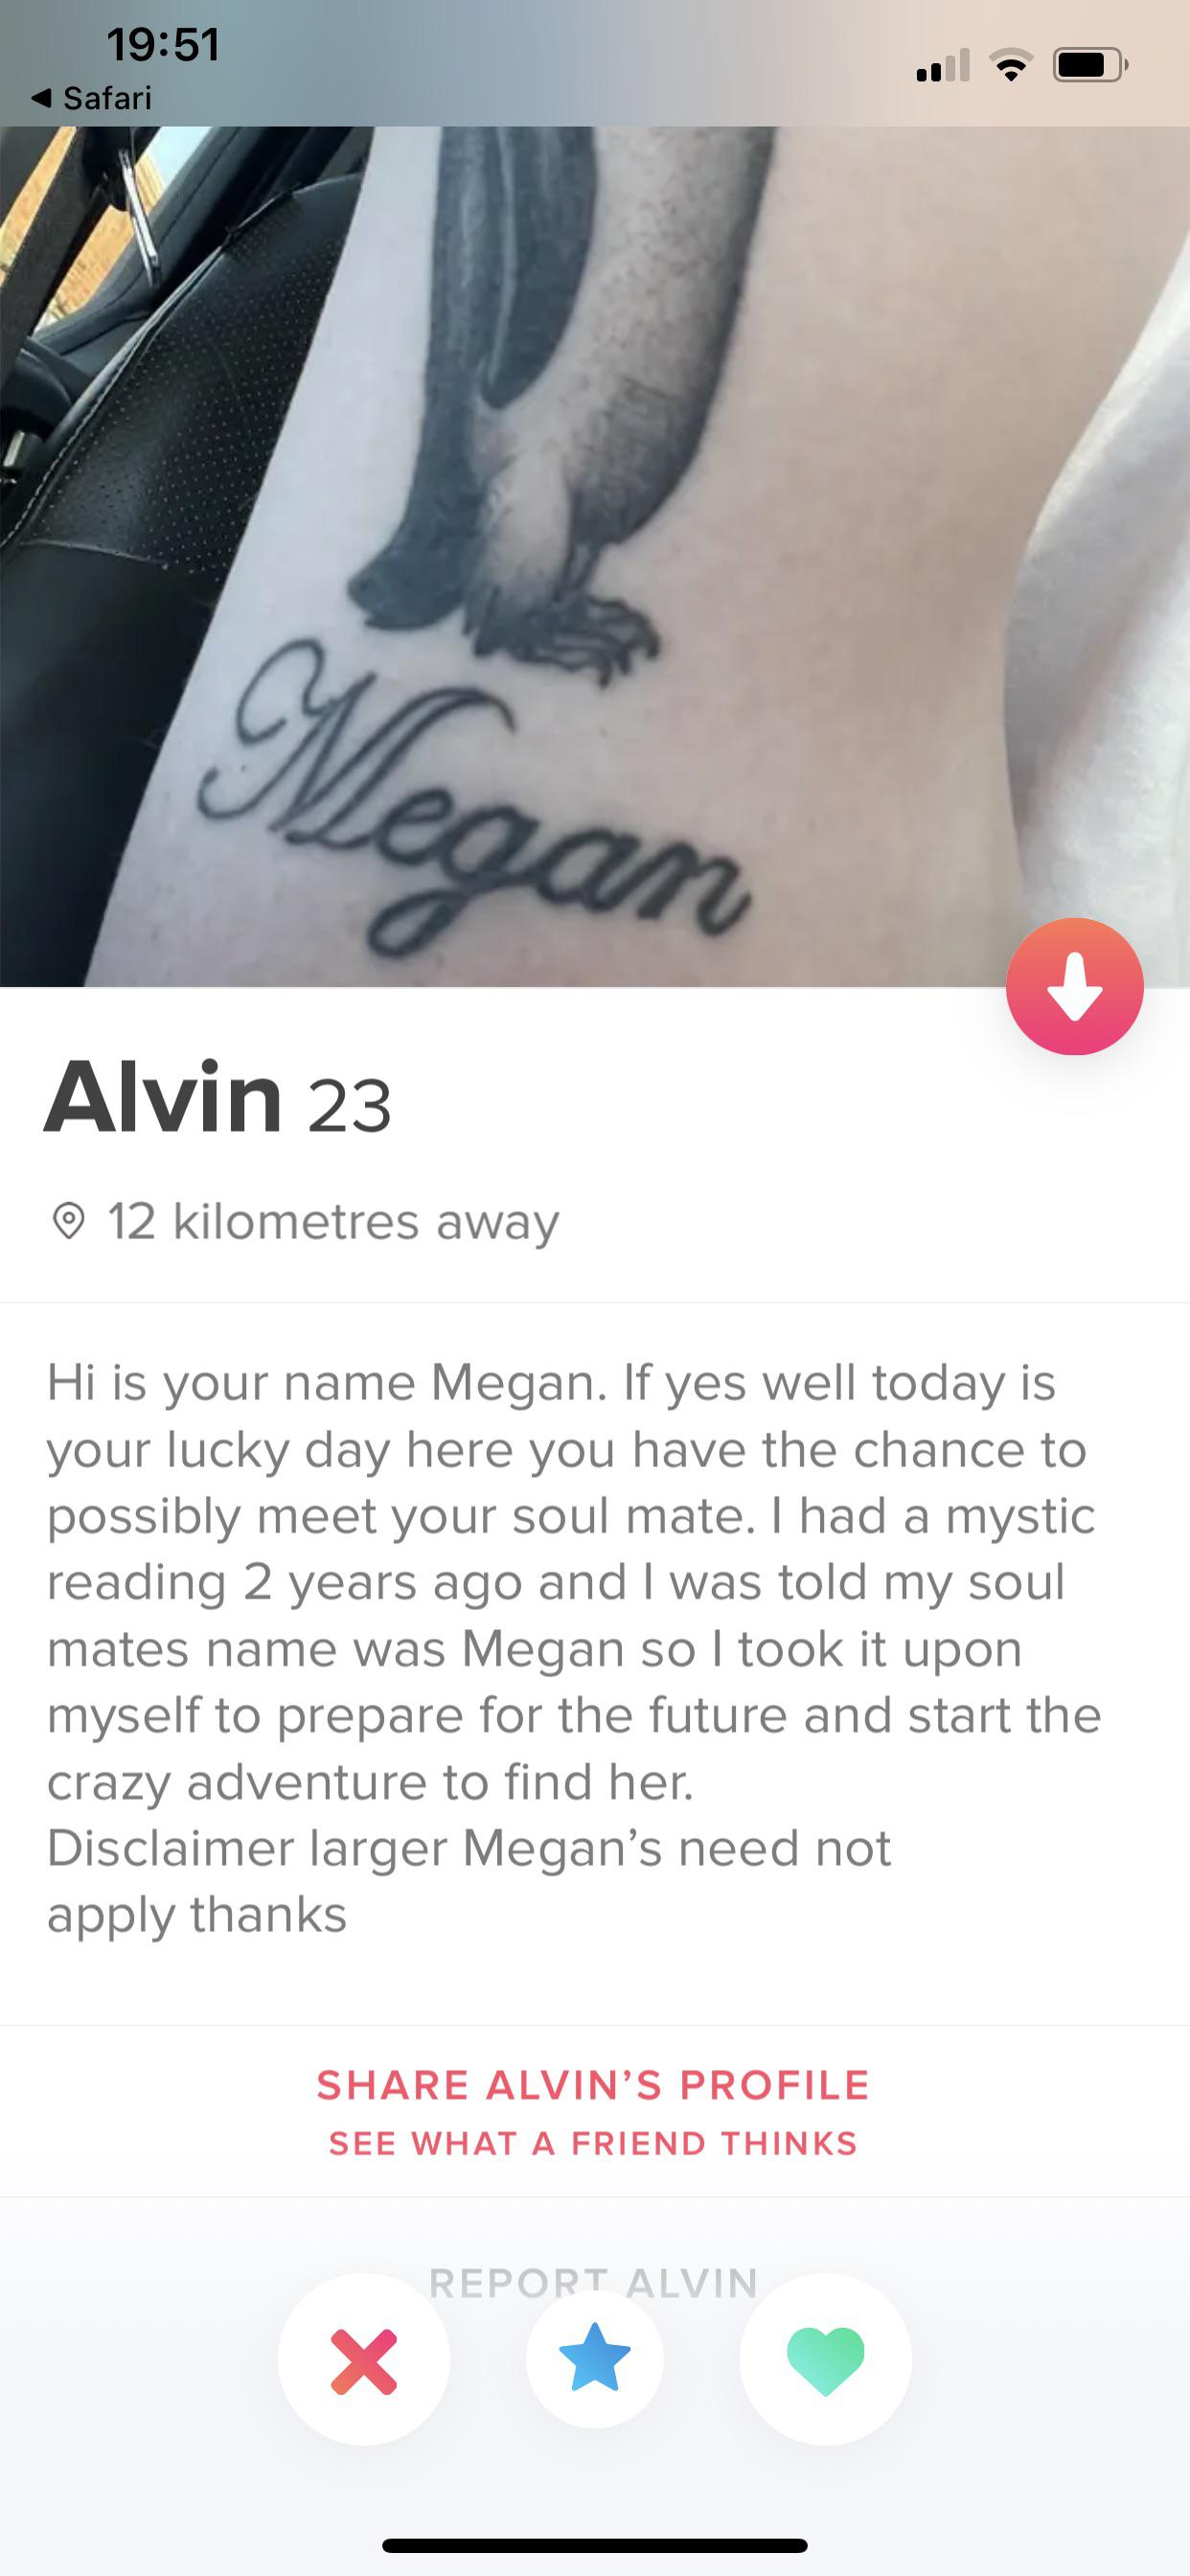 temporary tattoo - Safari Megan Alvin 23 12 kilometres away Hi is your name Megan. If yes well today is your lucky day here you have the chance to possibly meet your soul mate. I had a mystic reading 2 years ago and I was told my soul mates name was Megan